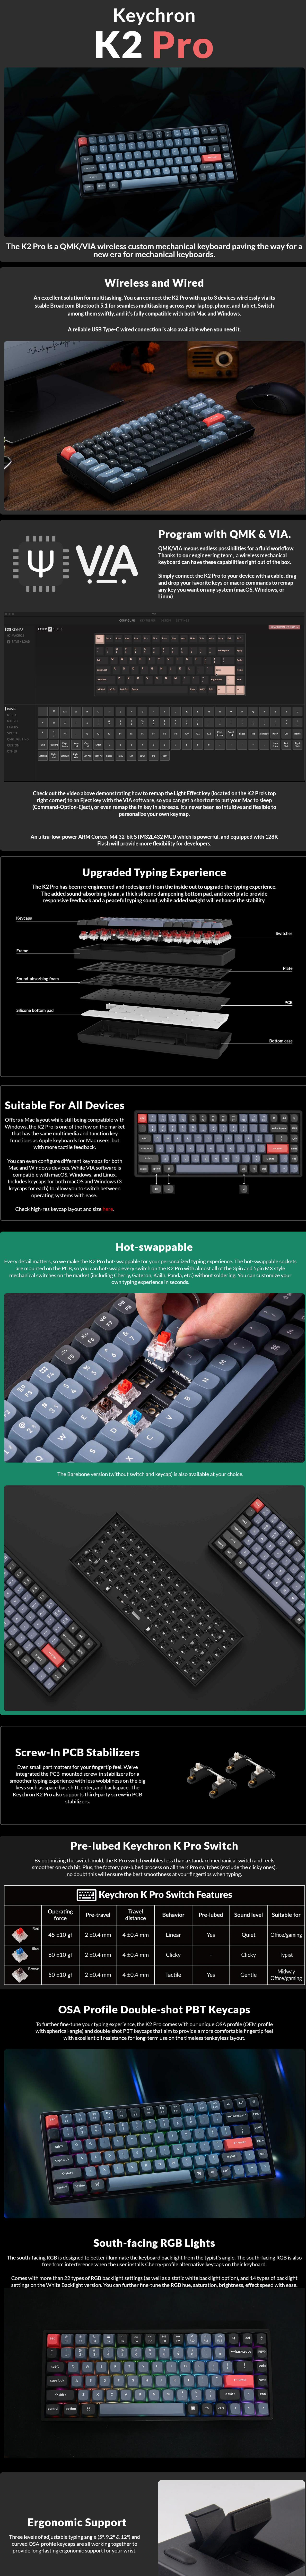 A large marketing image providing additional information about the product Keychron K2 Pro Compact RGB Wireless Mechanical Keyboard - Black (Brown Switch) - Additional alt info not provided